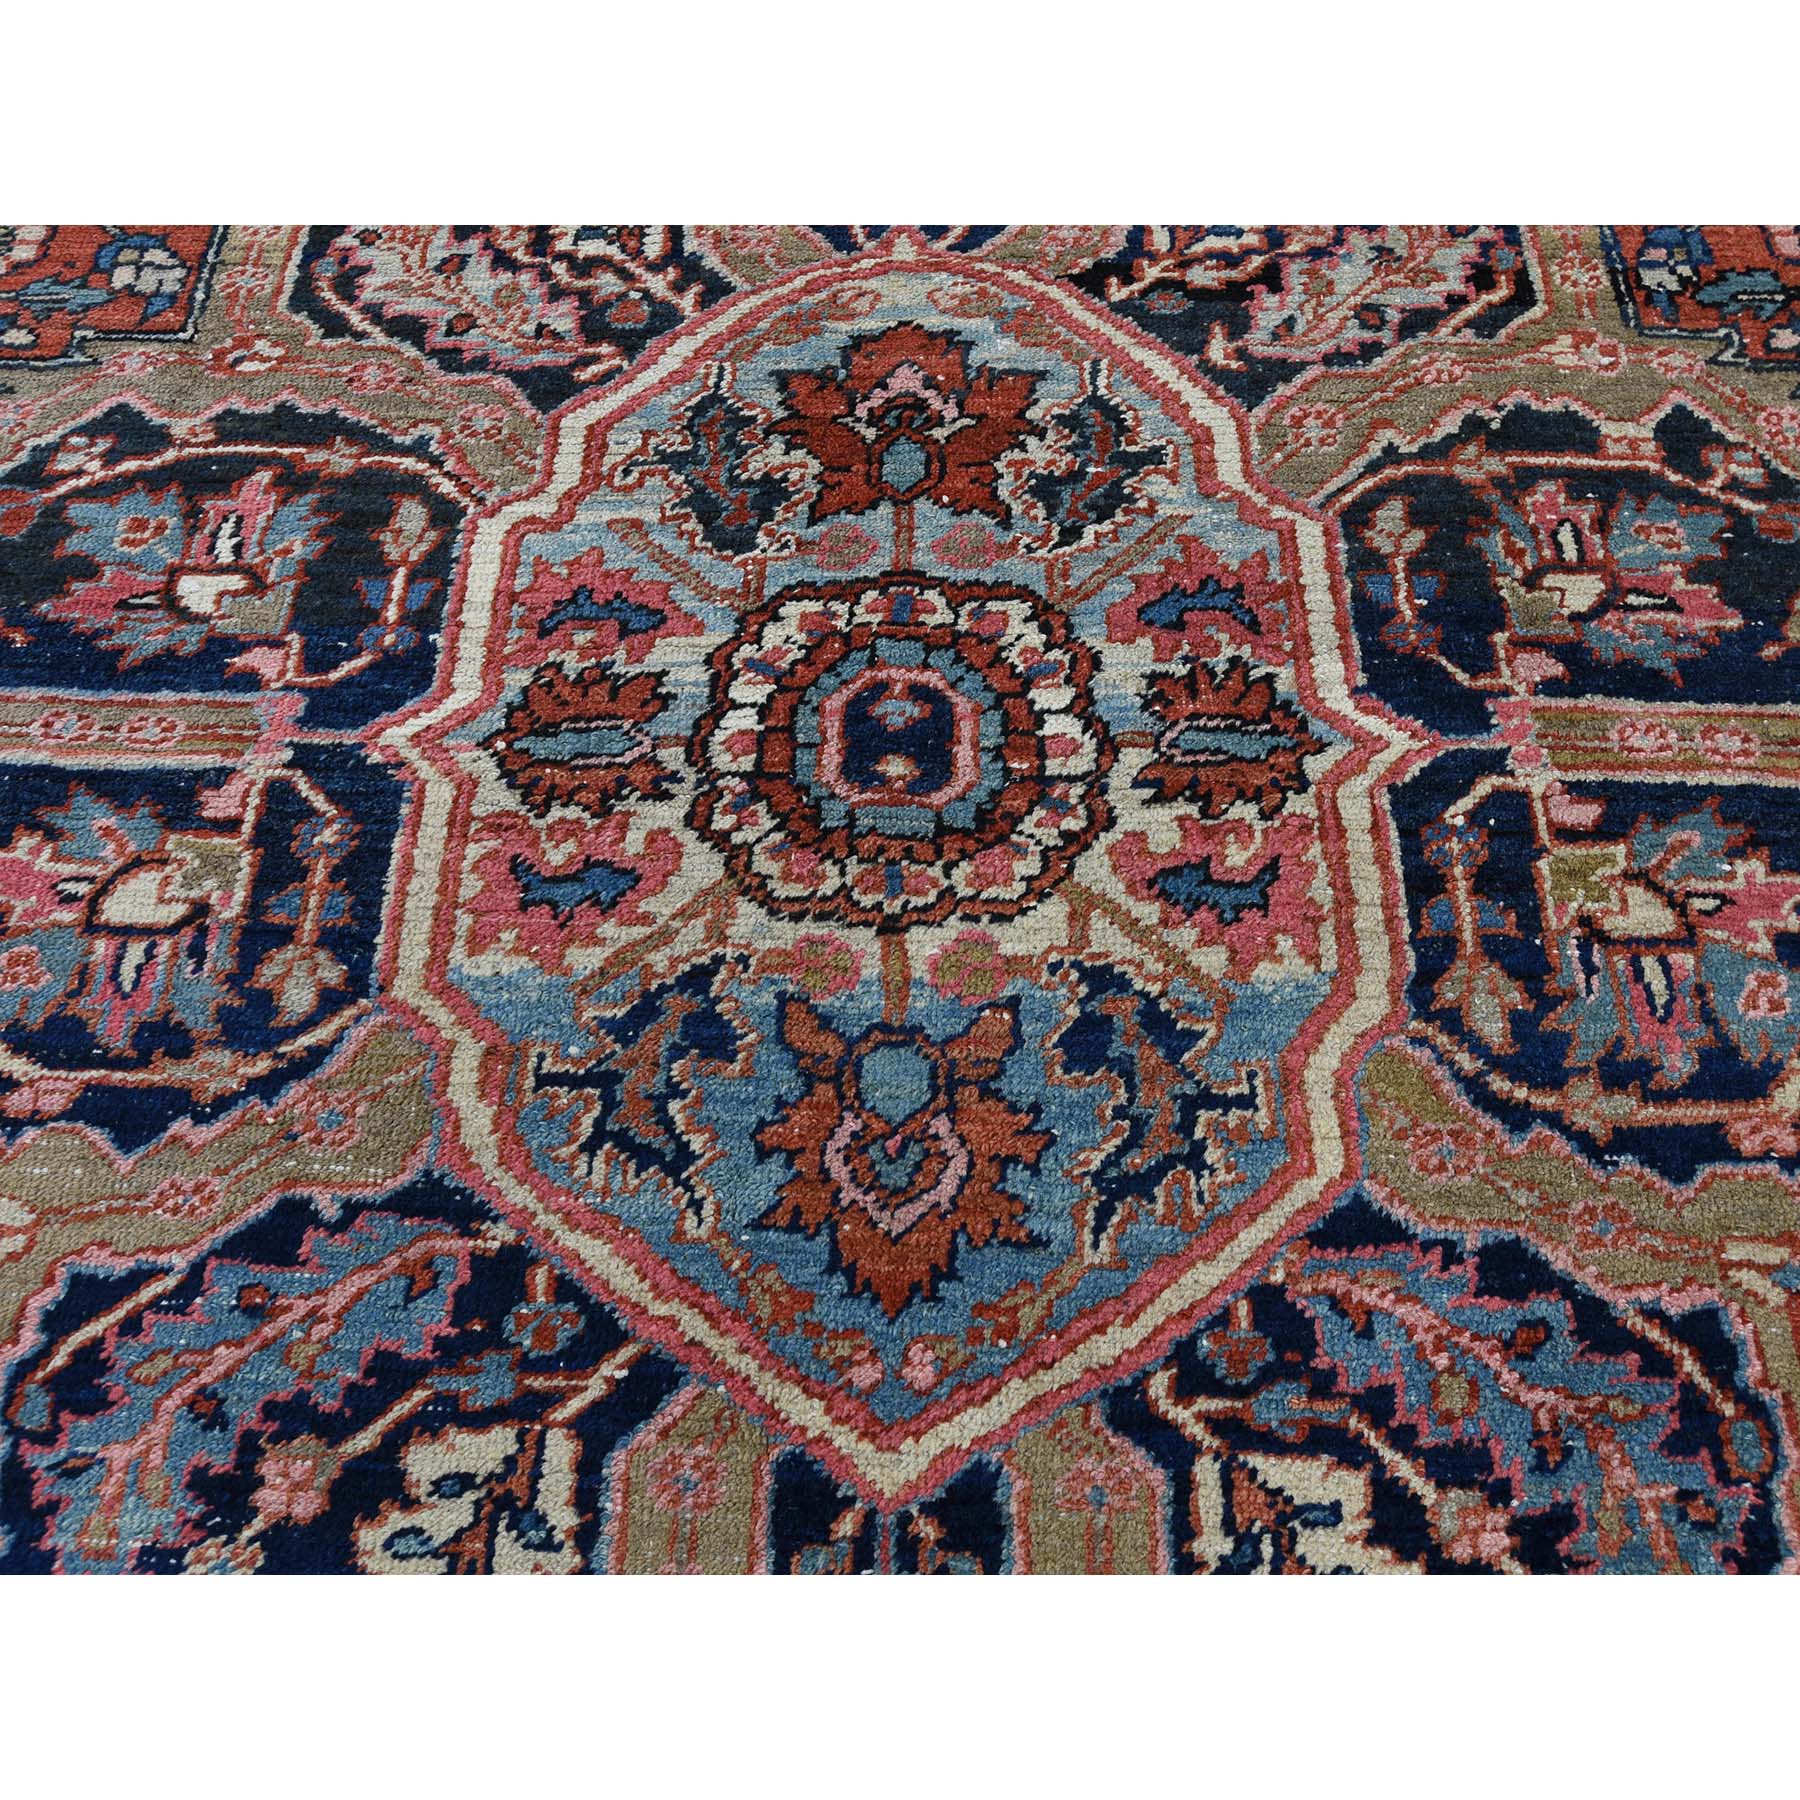 7-9 x11- Flower Design Antique Persian Heriz Good Condition Hand-Knotted Oriental Rug 